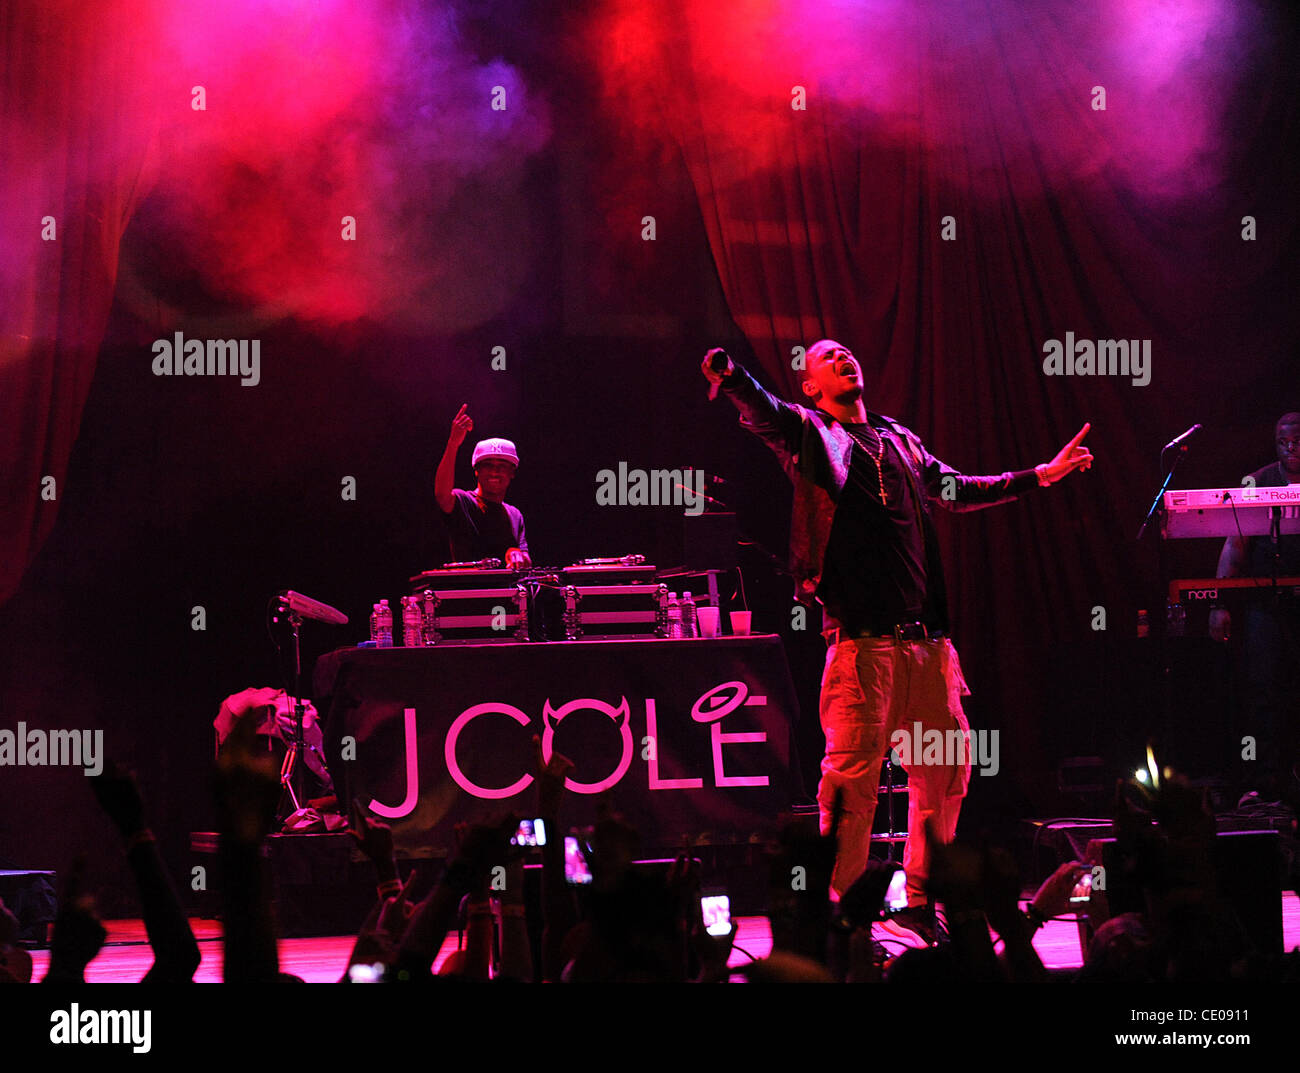 Oct 16, 2011 - Myrtle Beach, South Carolina; USA - Rap Artist J. COLE performs live as his 2011 tour makes a stop at the House of Blues located in Myrtle Beach. Copyright 2011 Jason Moore. (Credit Image: © Jason Moore/ZUMAPRESS.com) Stock Photo